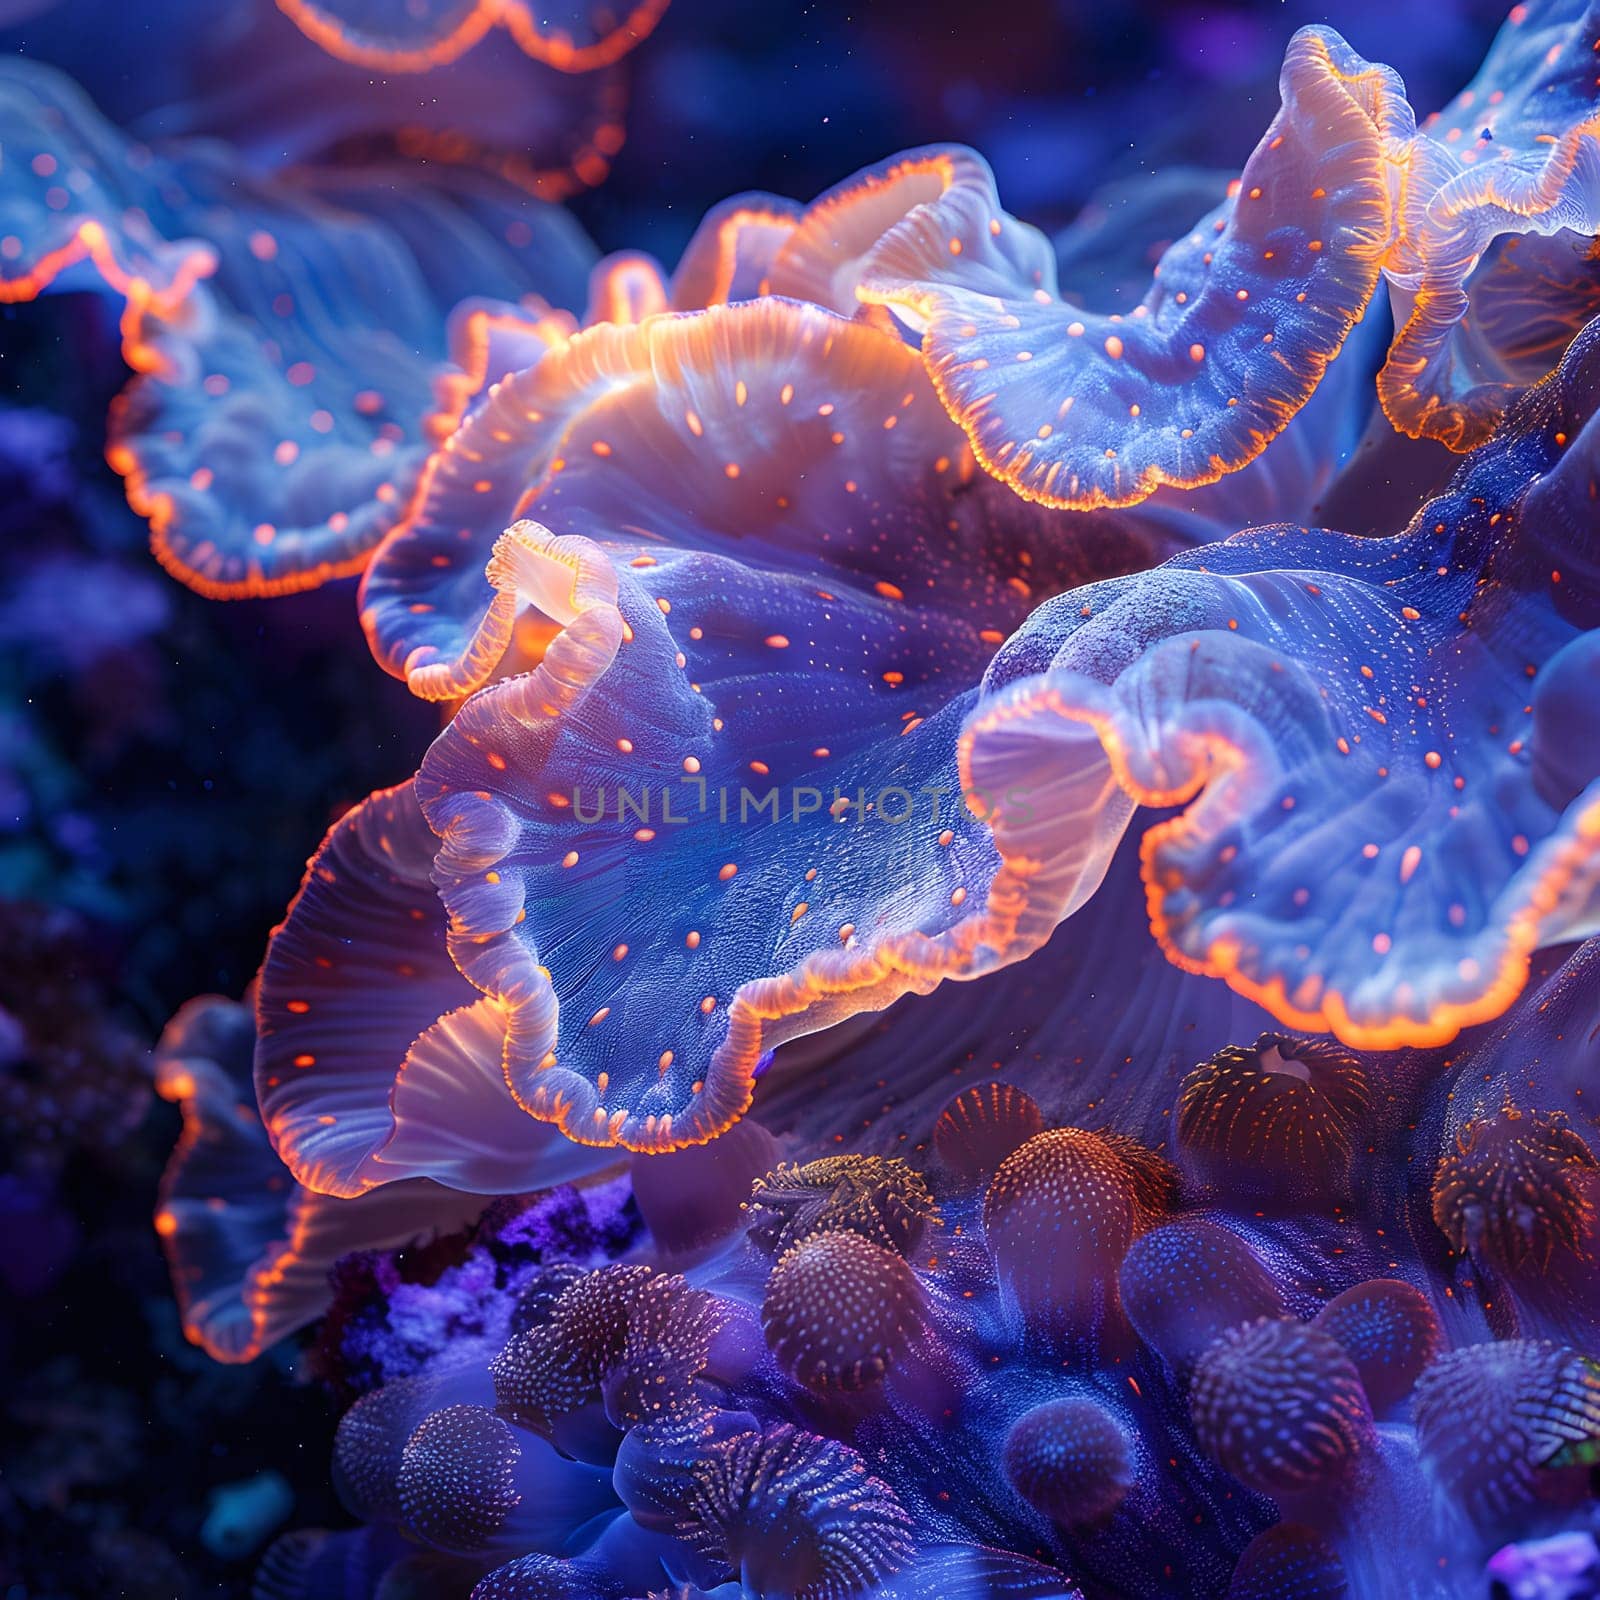 A closeup shot of an electric blue and orange coral reef underwater, showcasing marine invertebrates and other organisms thriving in the fluid environment of the sea